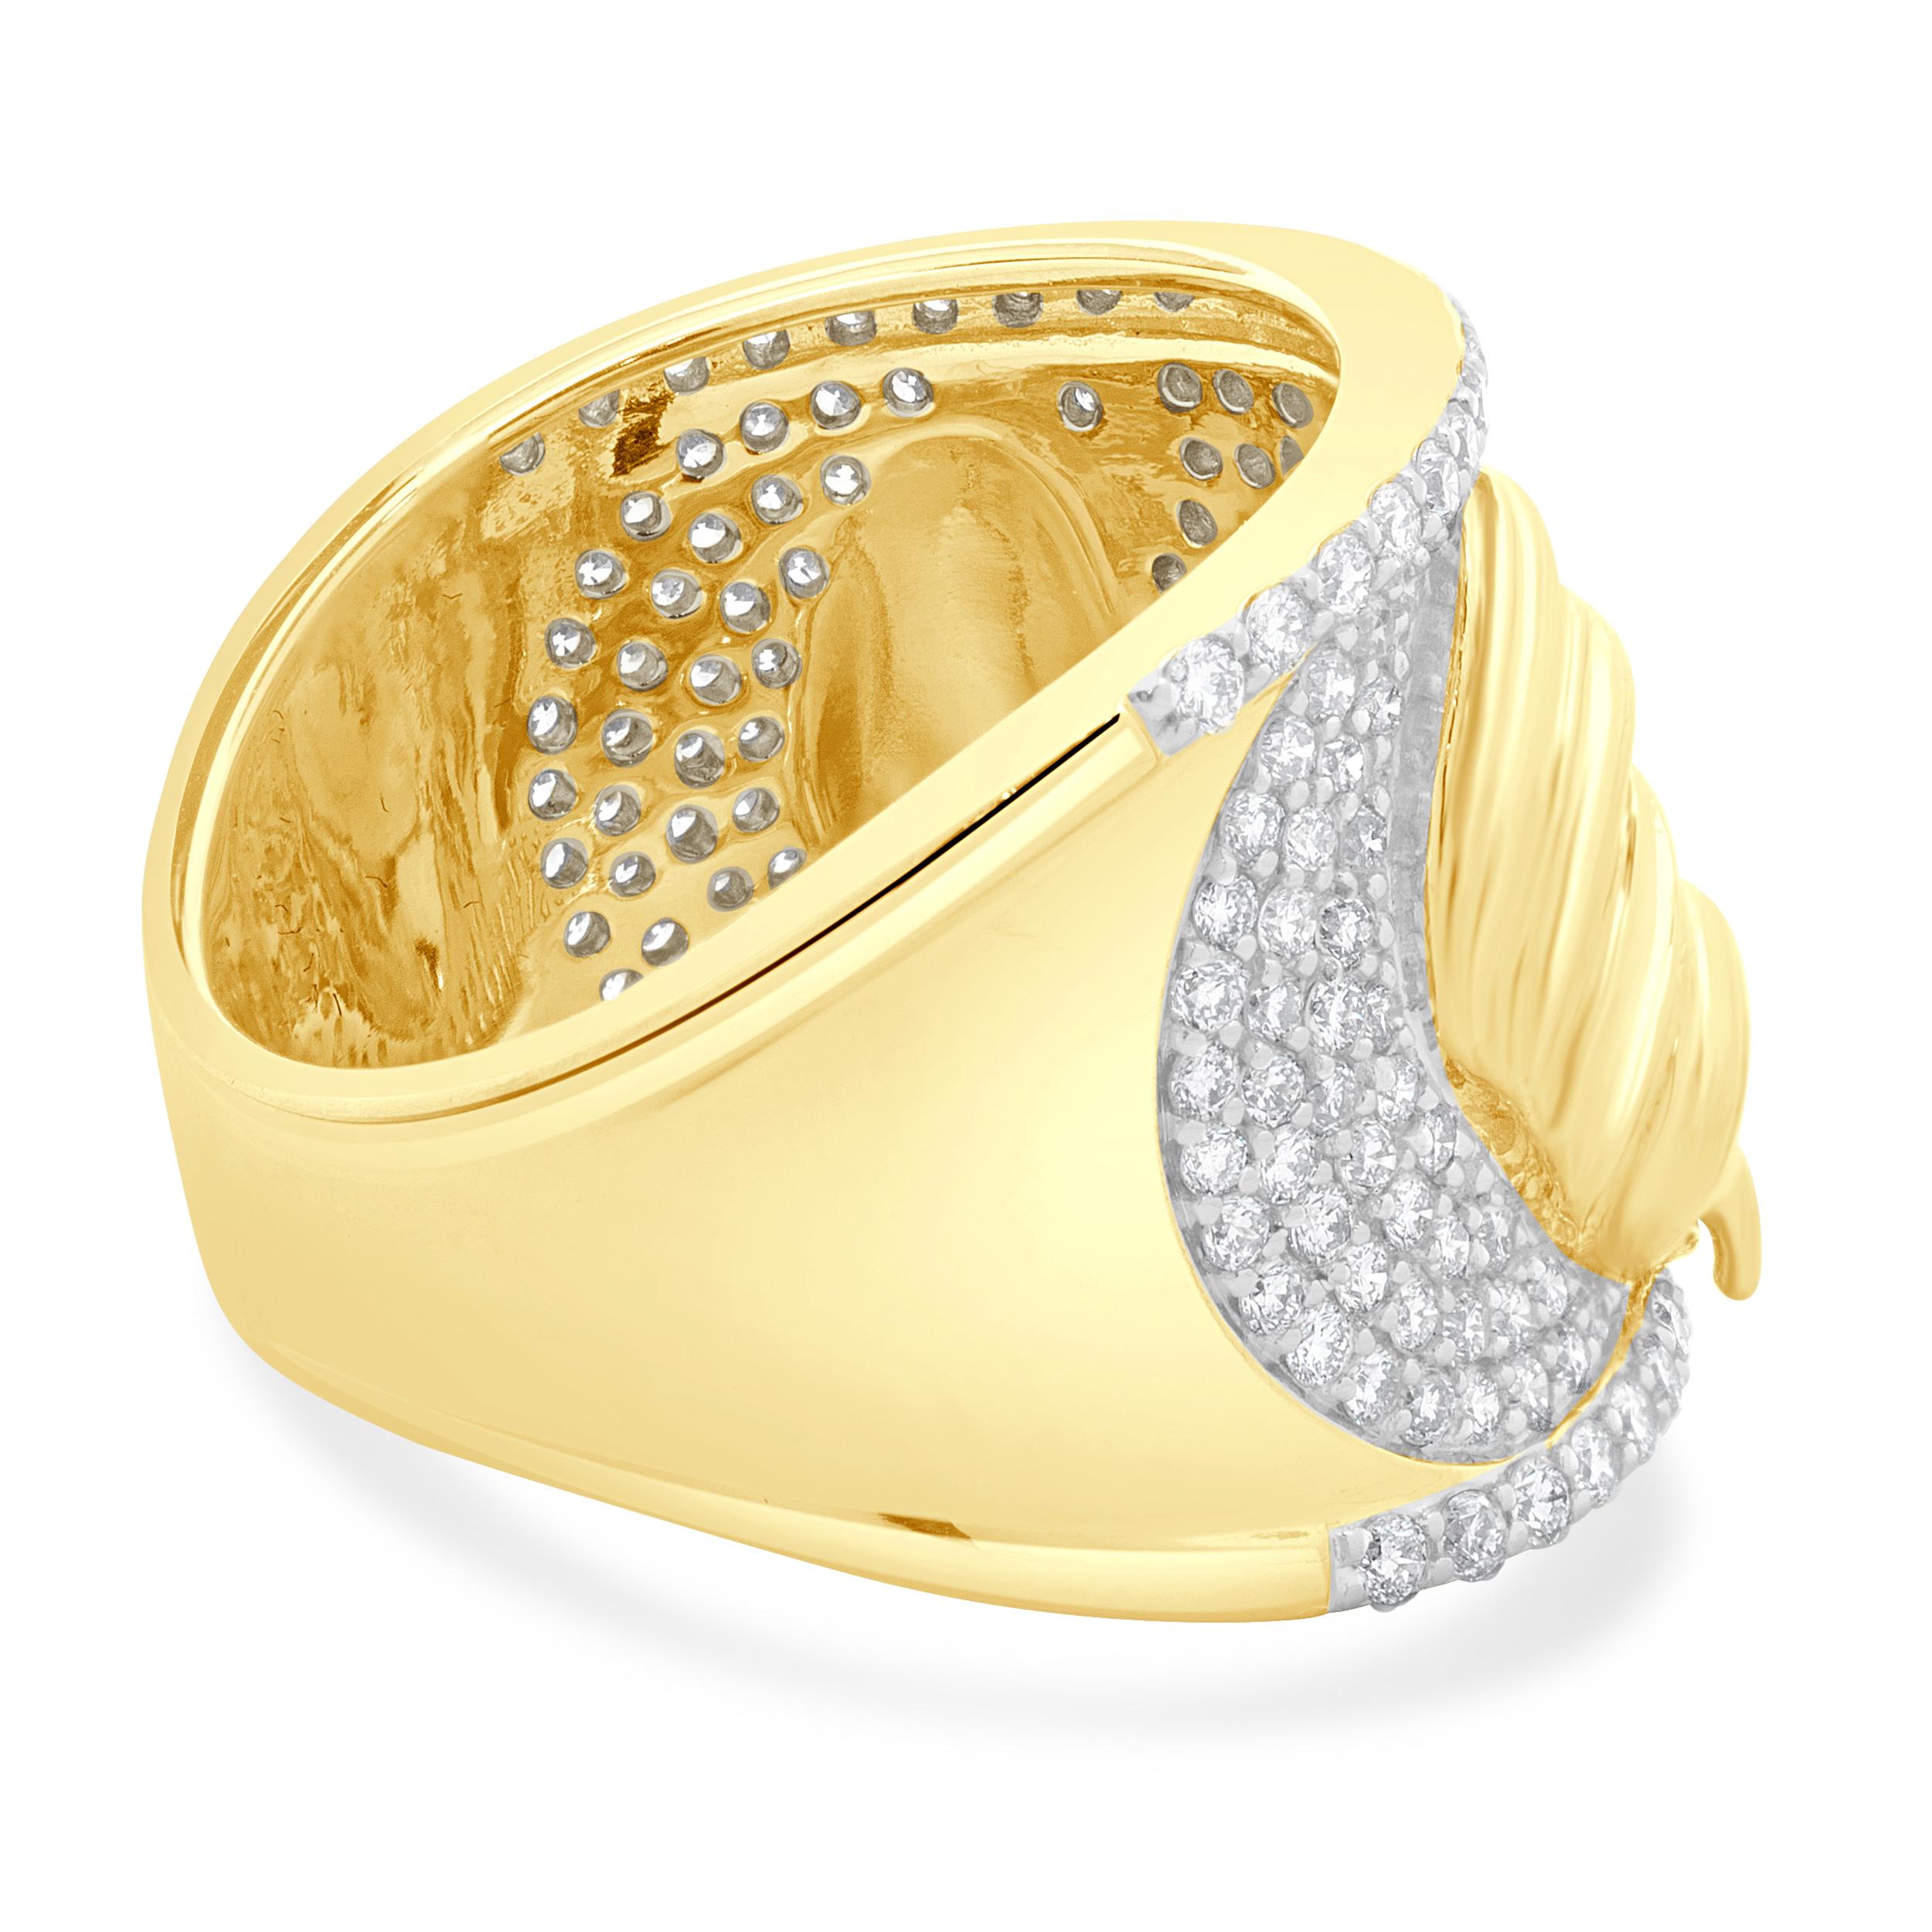 14 Karat Yellow Gold Pave Diamond Double Horse Ring In Excellent Condition For Sale In Scottsdale, AZ